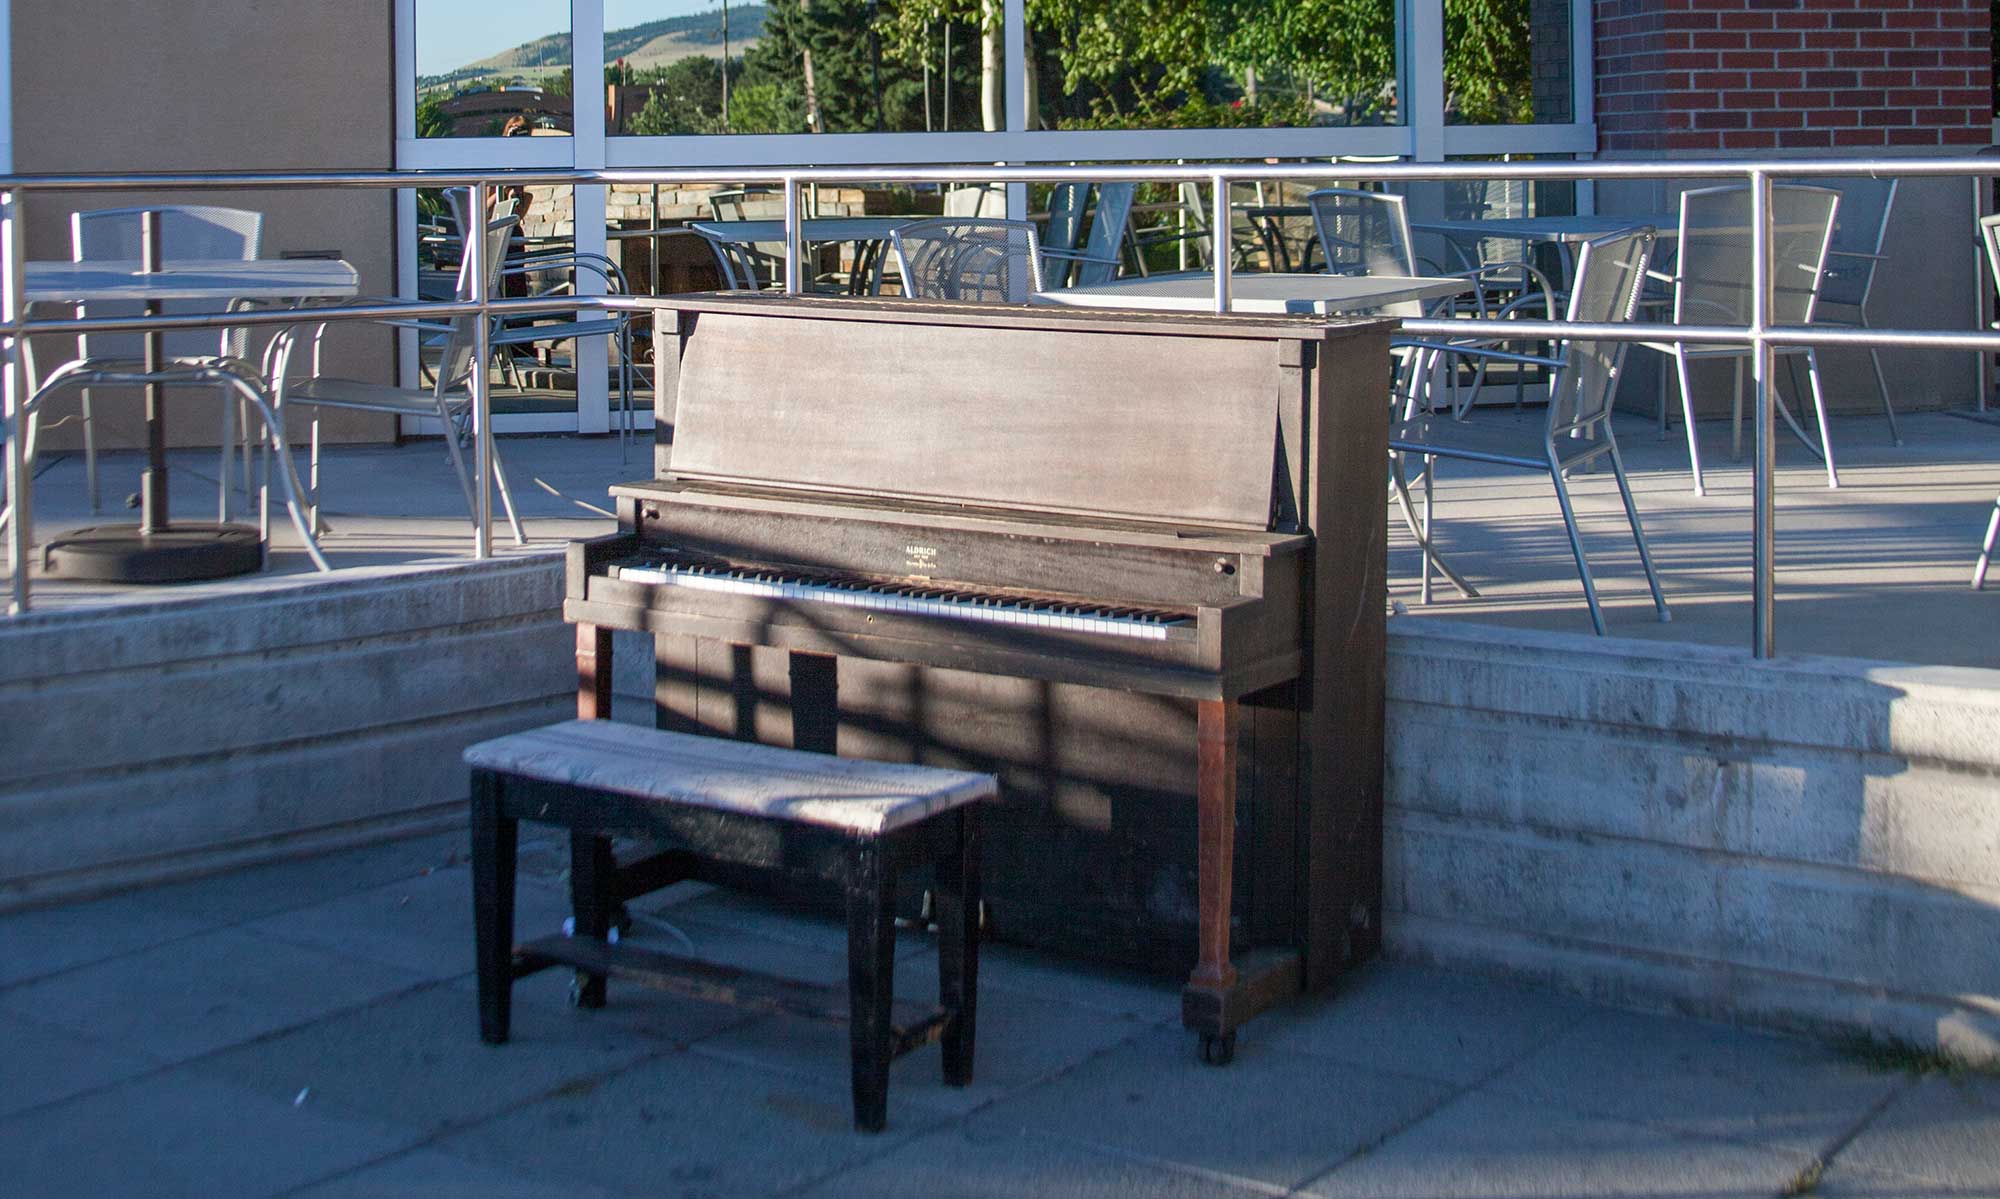 Pianos in Downtown Missoula